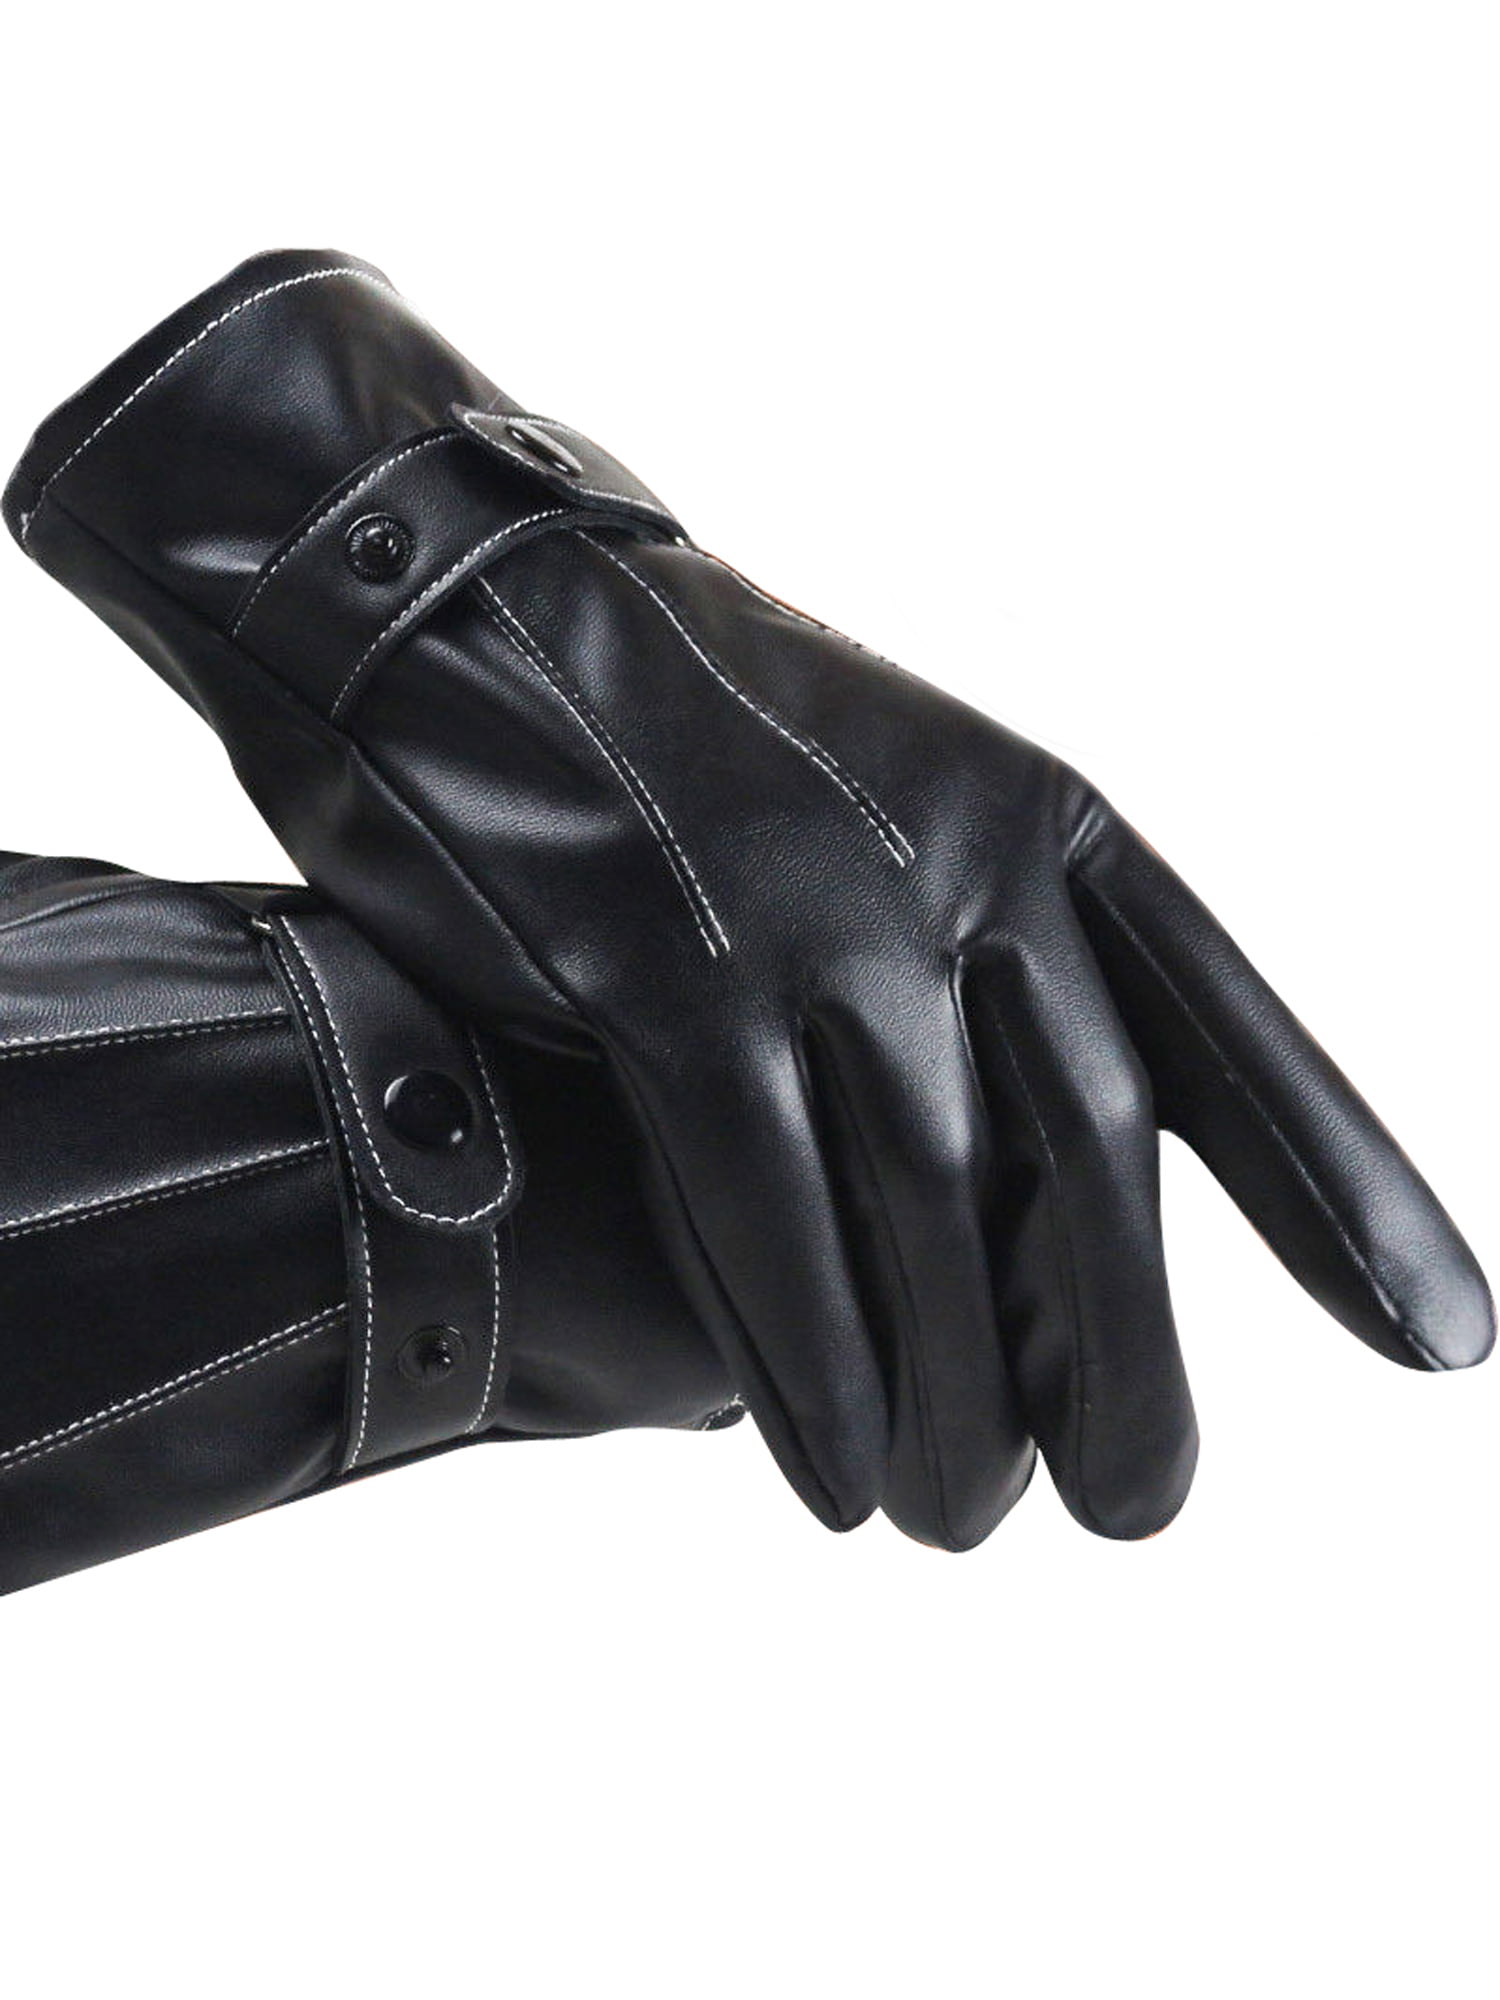 New Mens Leather Gloves Soft Driving Winter Thinsulate Lined Mobile Touch Screen 